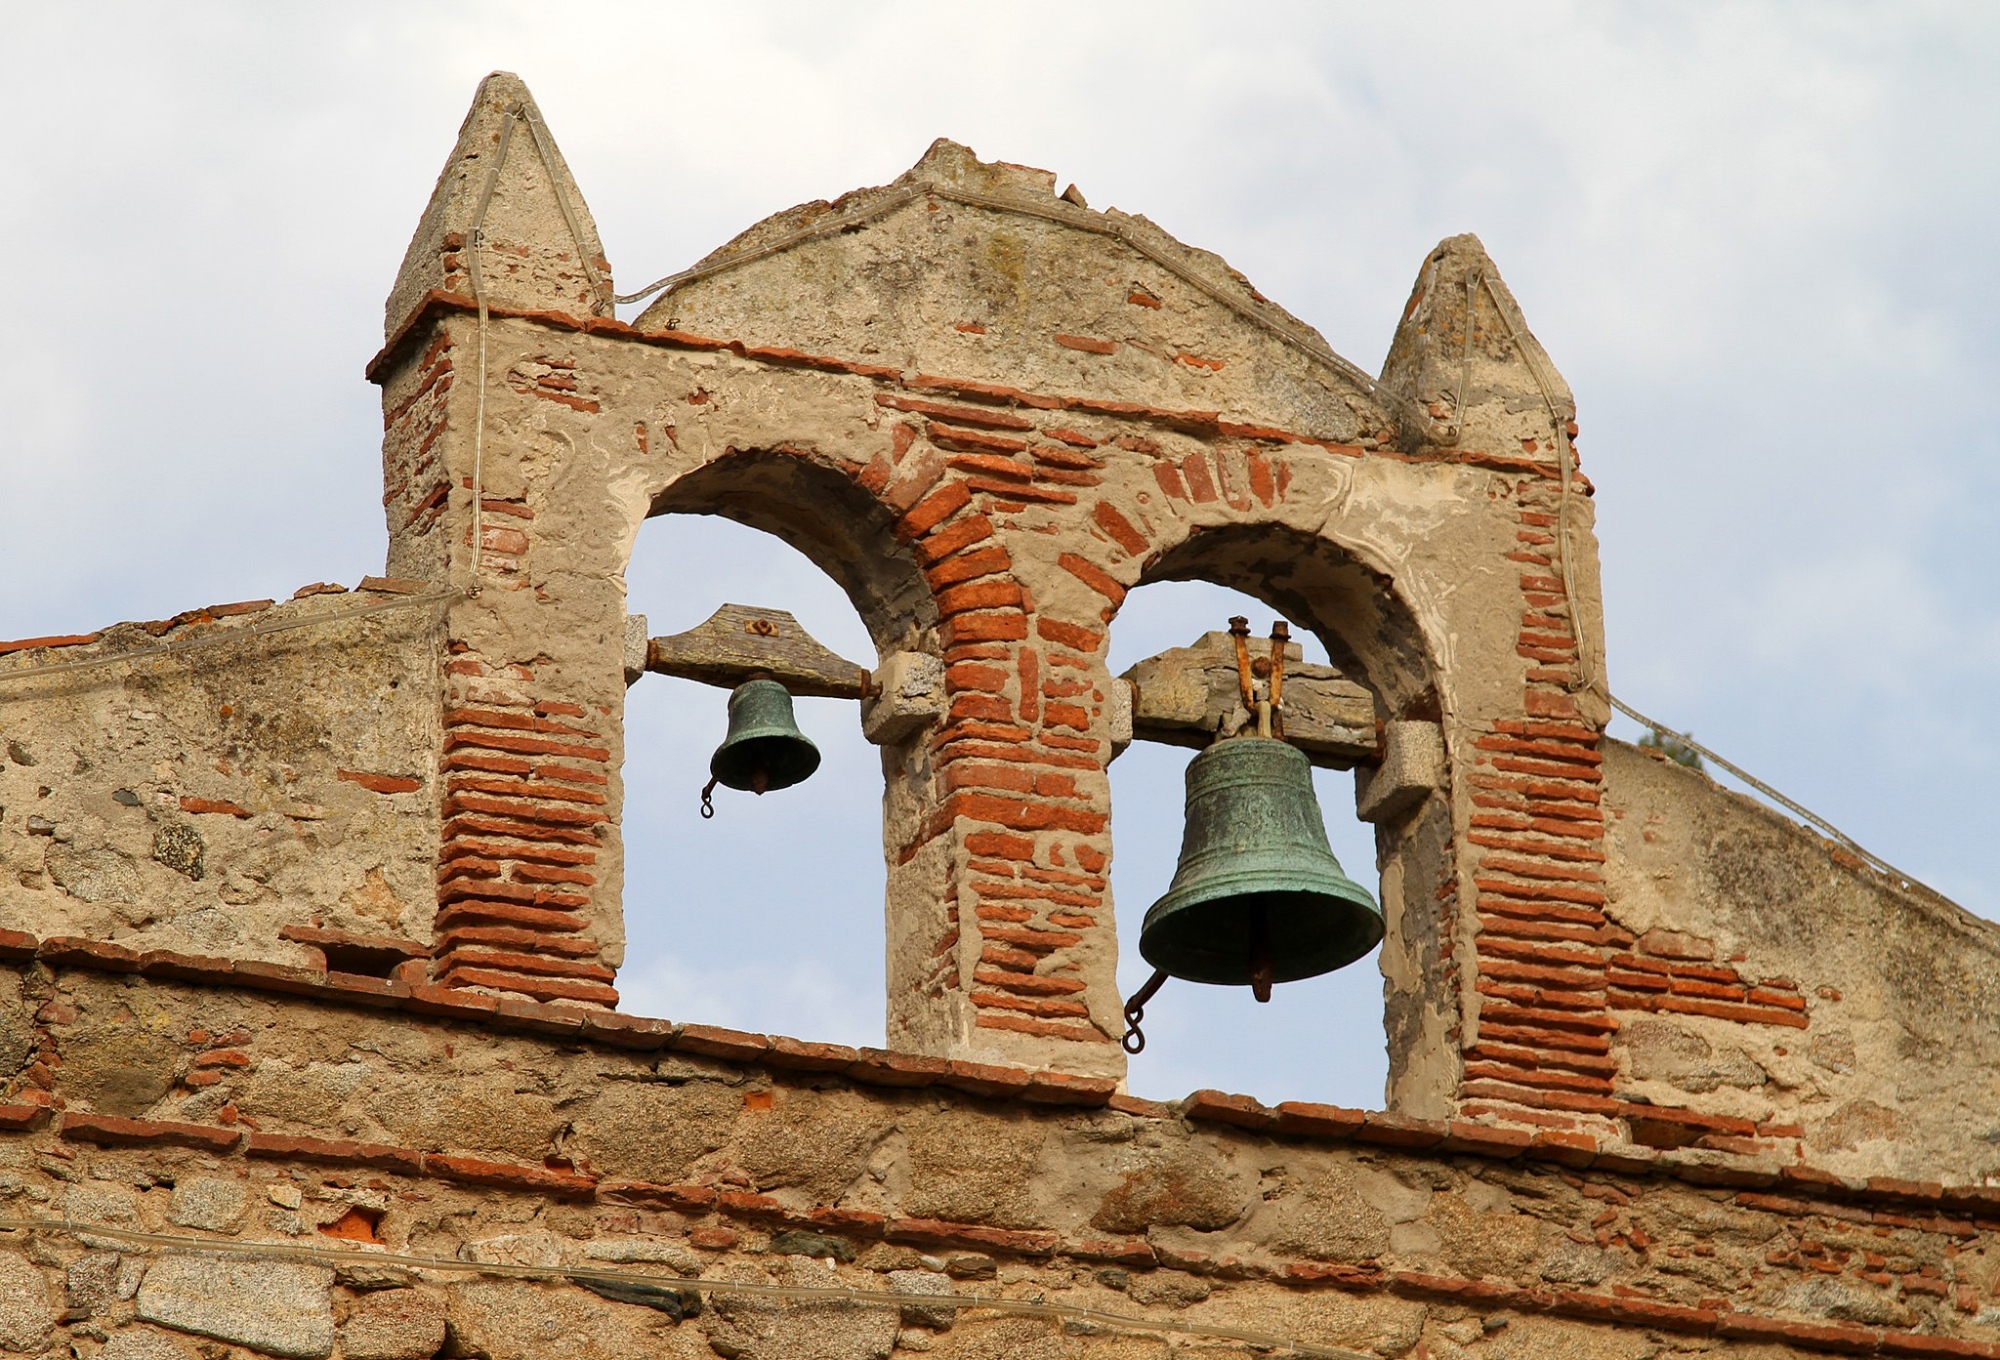 Bells of the Church of Saints Pietro and Paolo in San Piero